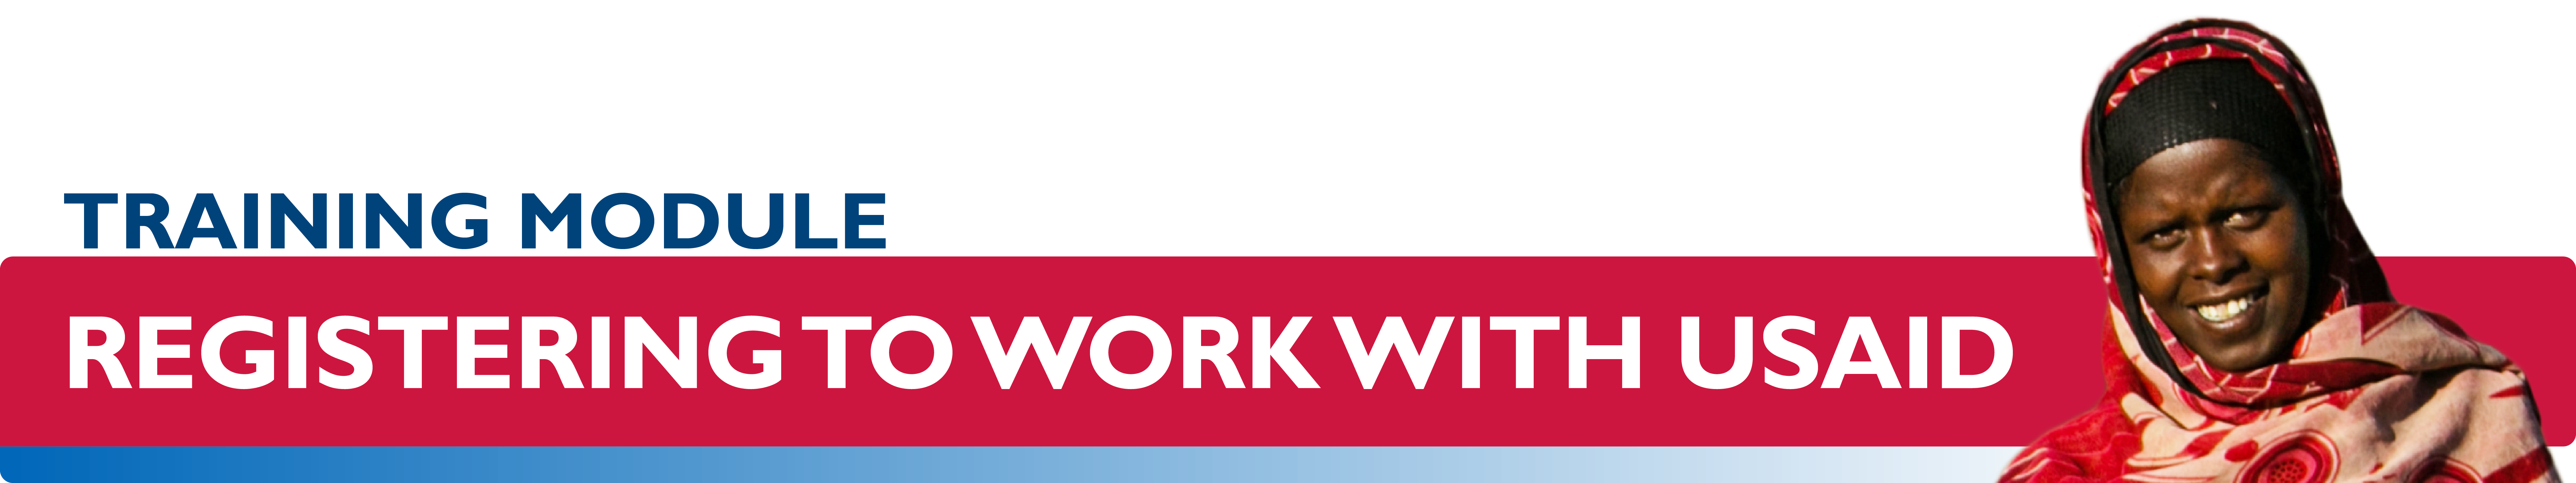 REGISTERING TO WORK WITH USAID: MAIN STEP-BY-STEP GUIDE